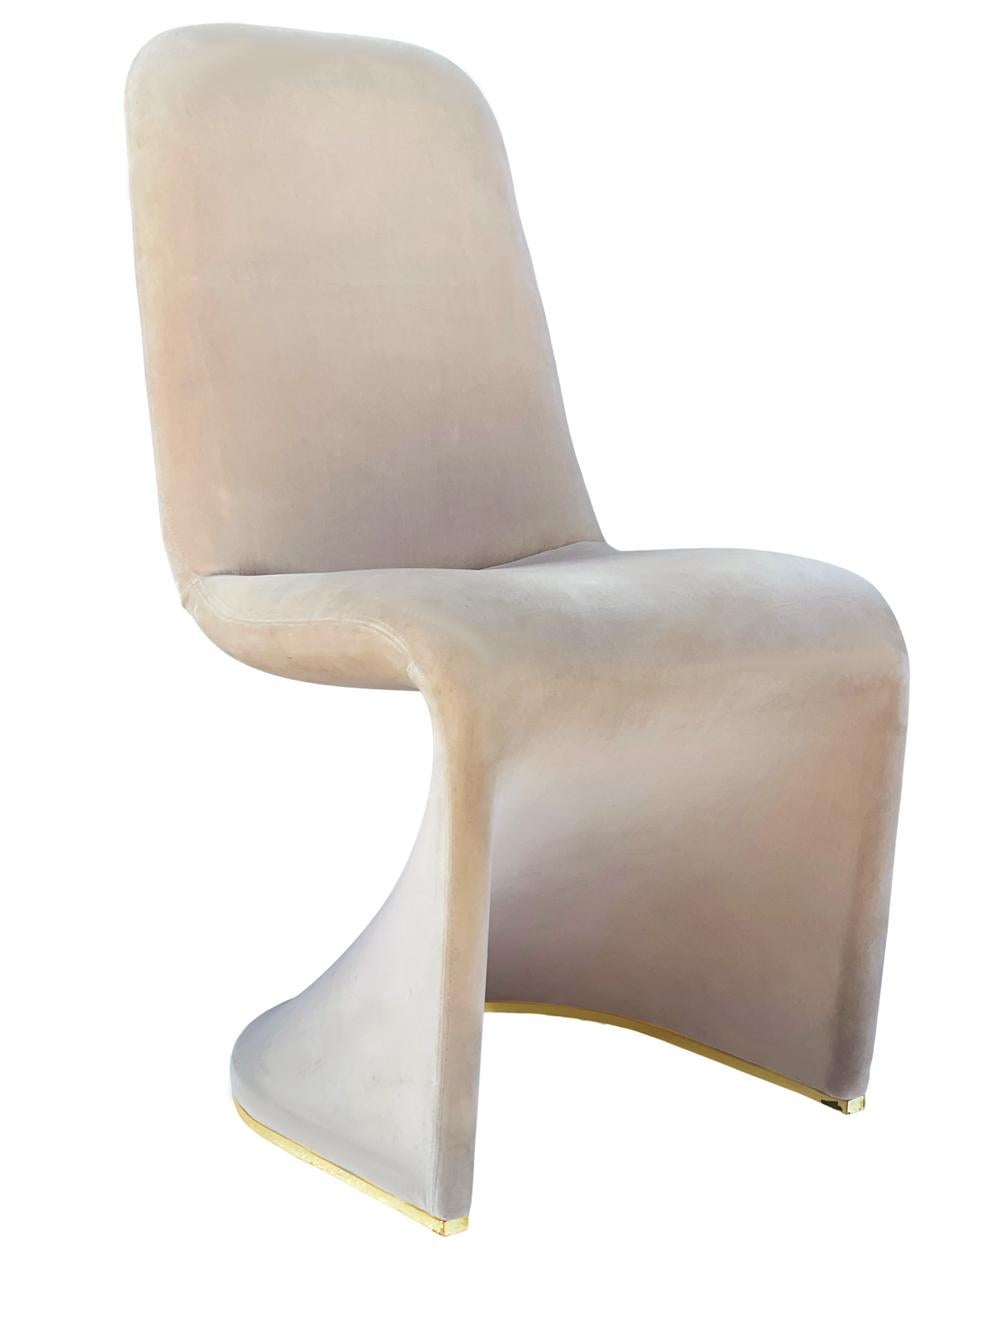 sculptural dining chairs